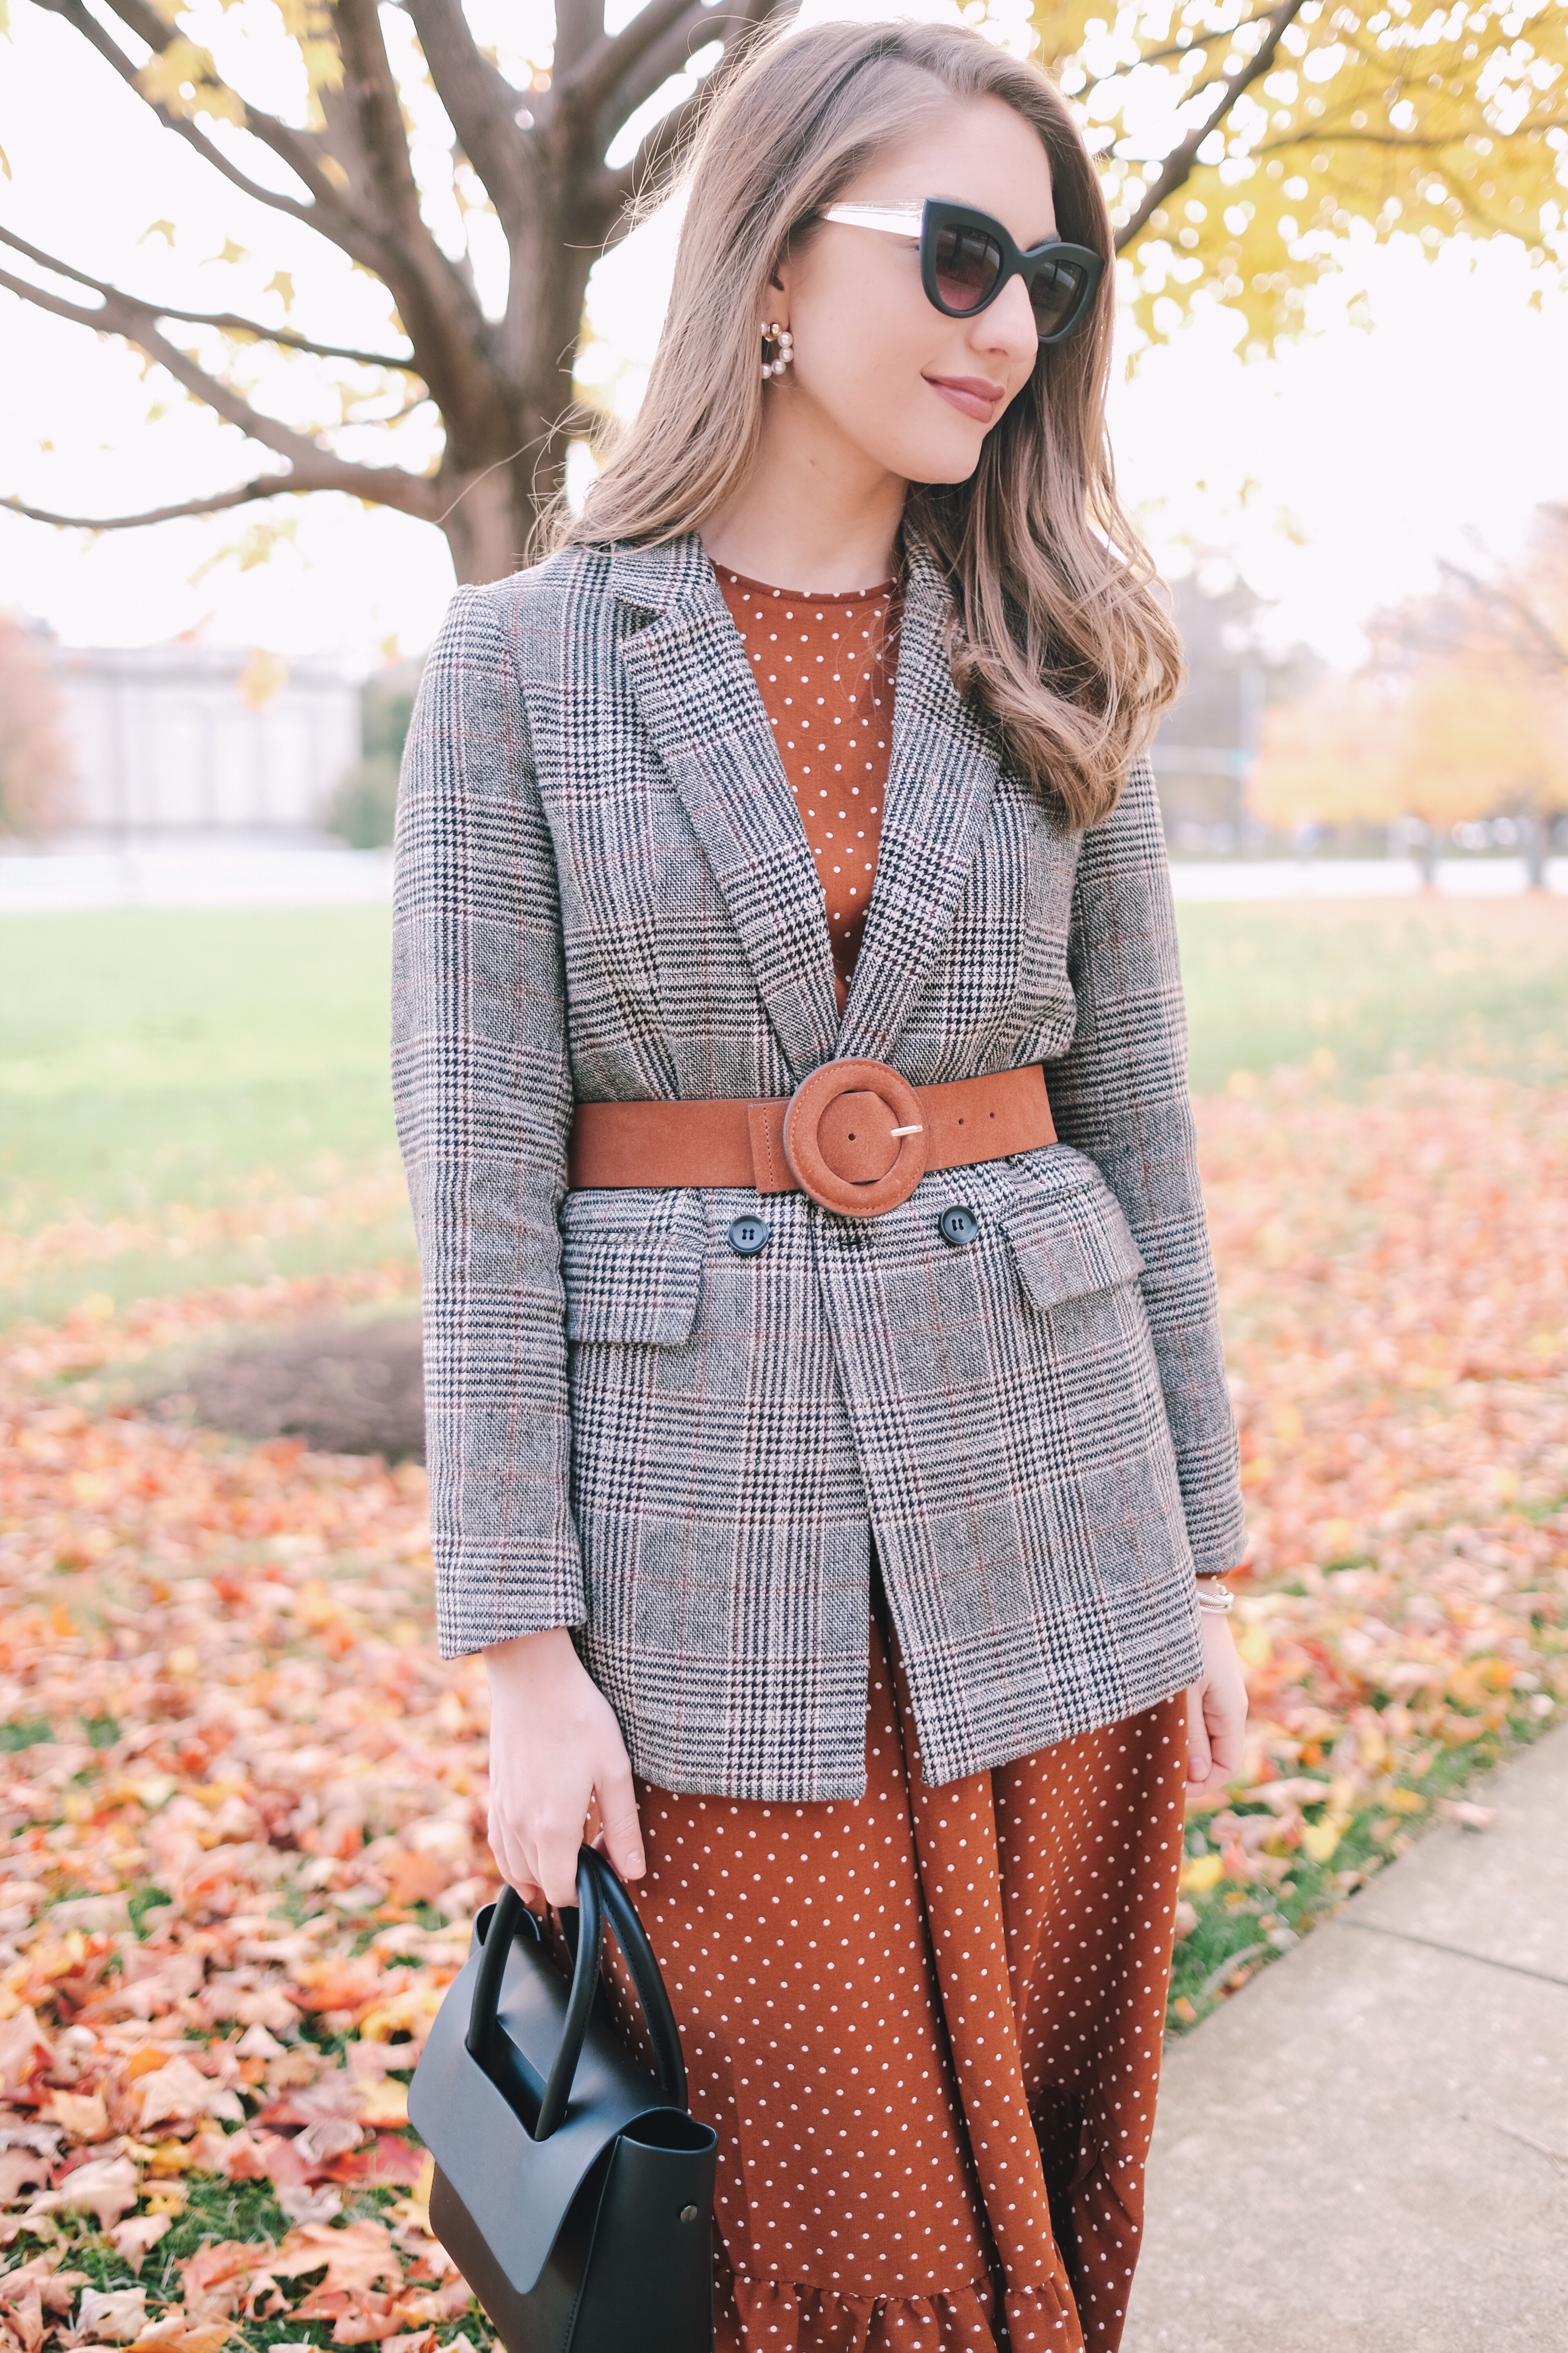 Classy thanksgiving outfit | Miss Madeline Rose